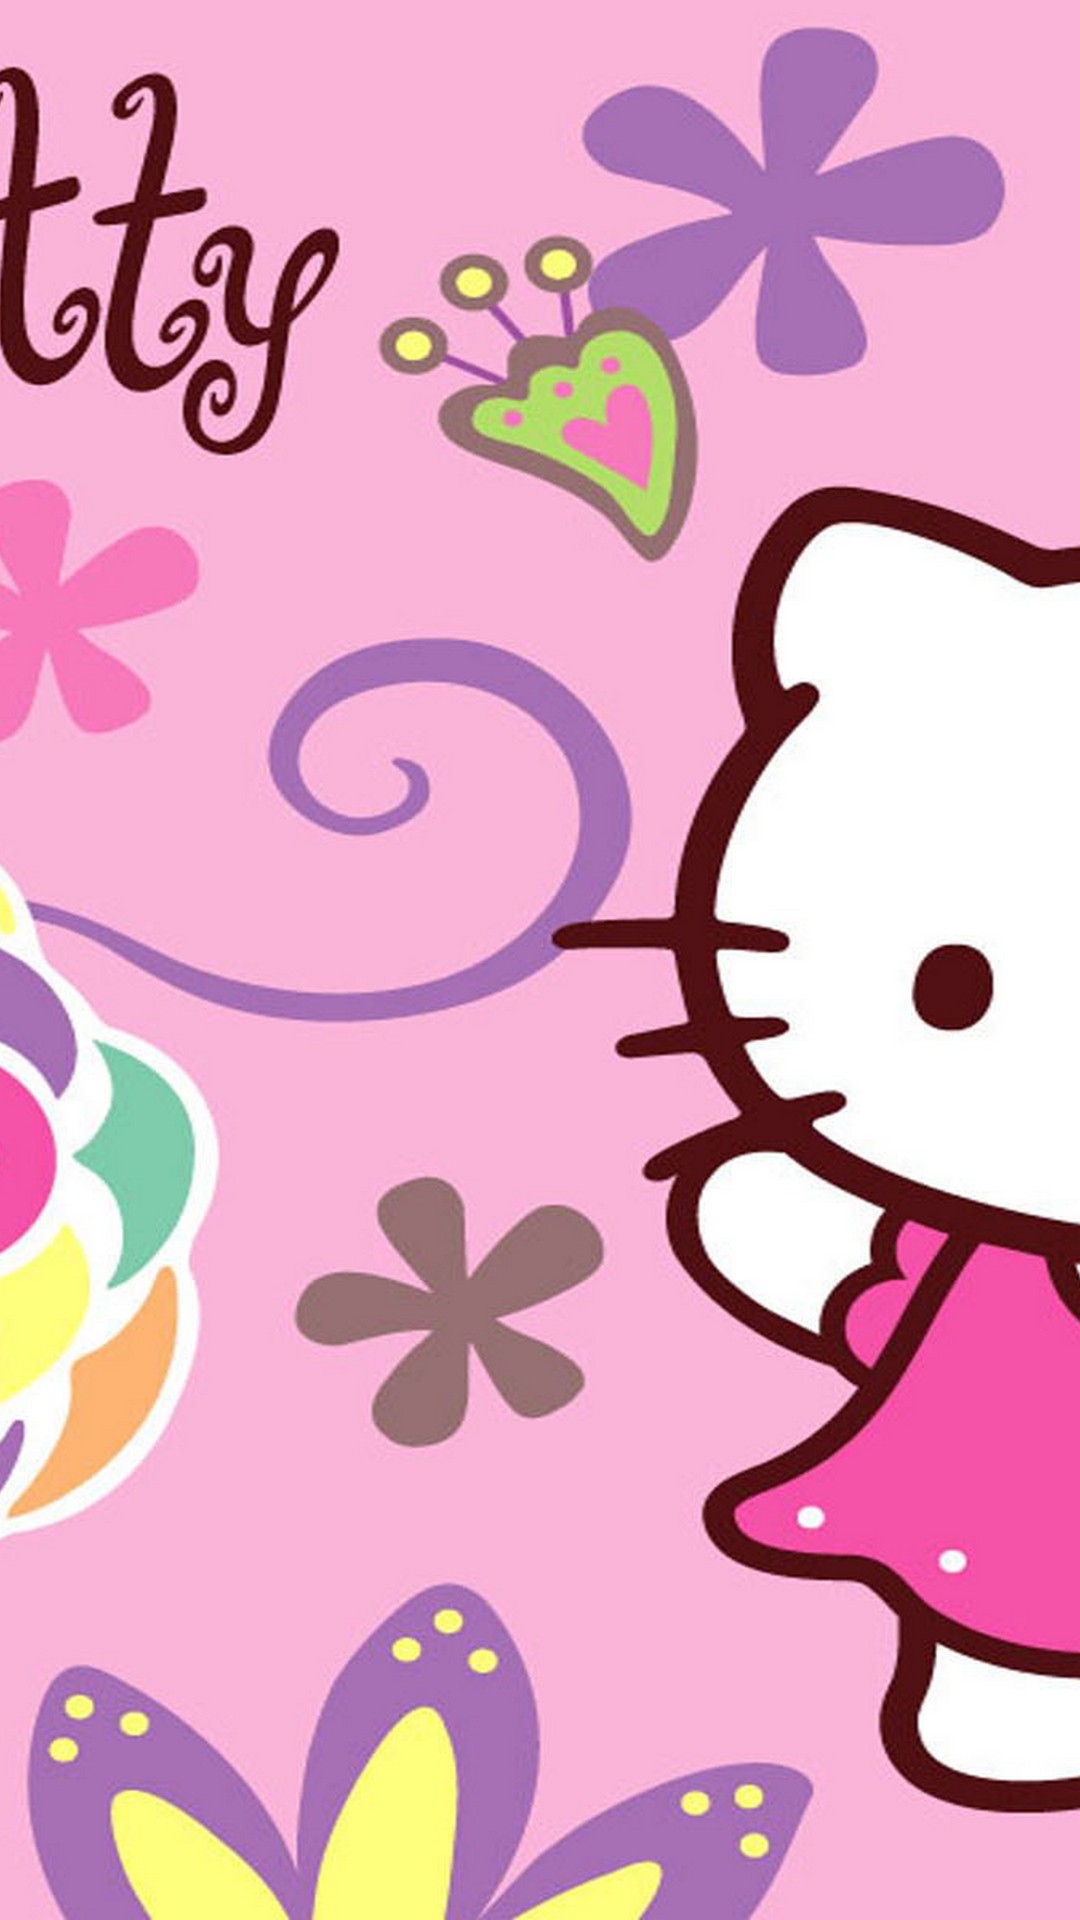 iPhone X Wallpaper Hello Kitty Pictures with image resolution 1080x1920 pixel. You can make this wallpaper for your iPhone 5, 6, 7, 8, X backgrounds, Mobile Screensaver, or iPad Lock Screen